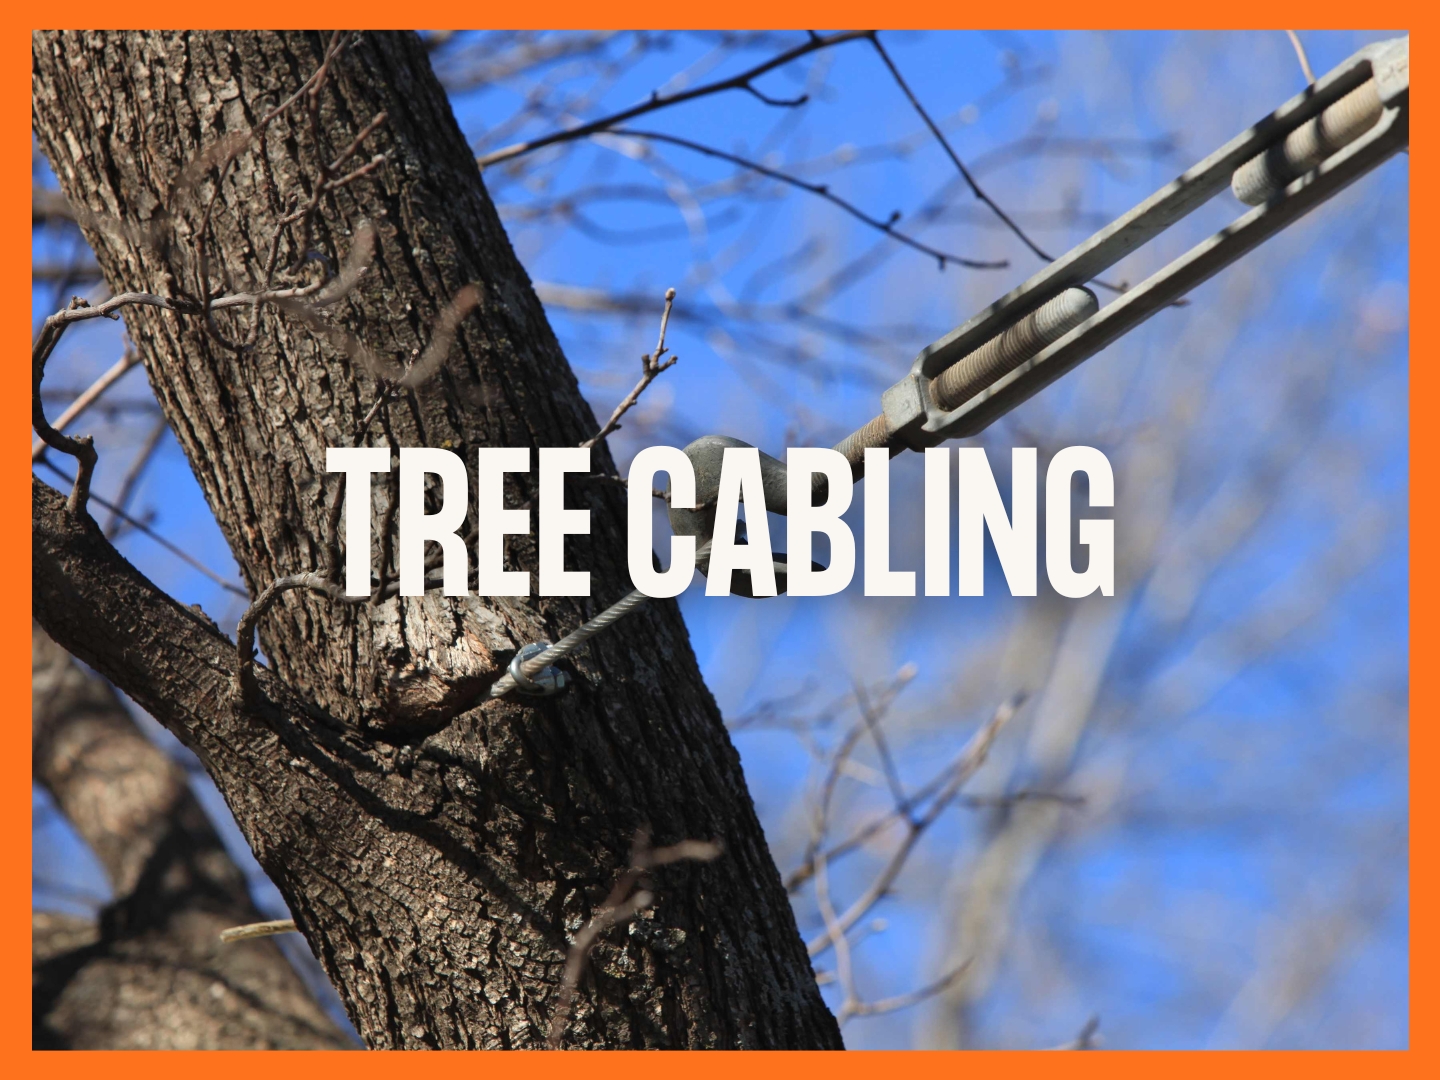 Tree-Cabling